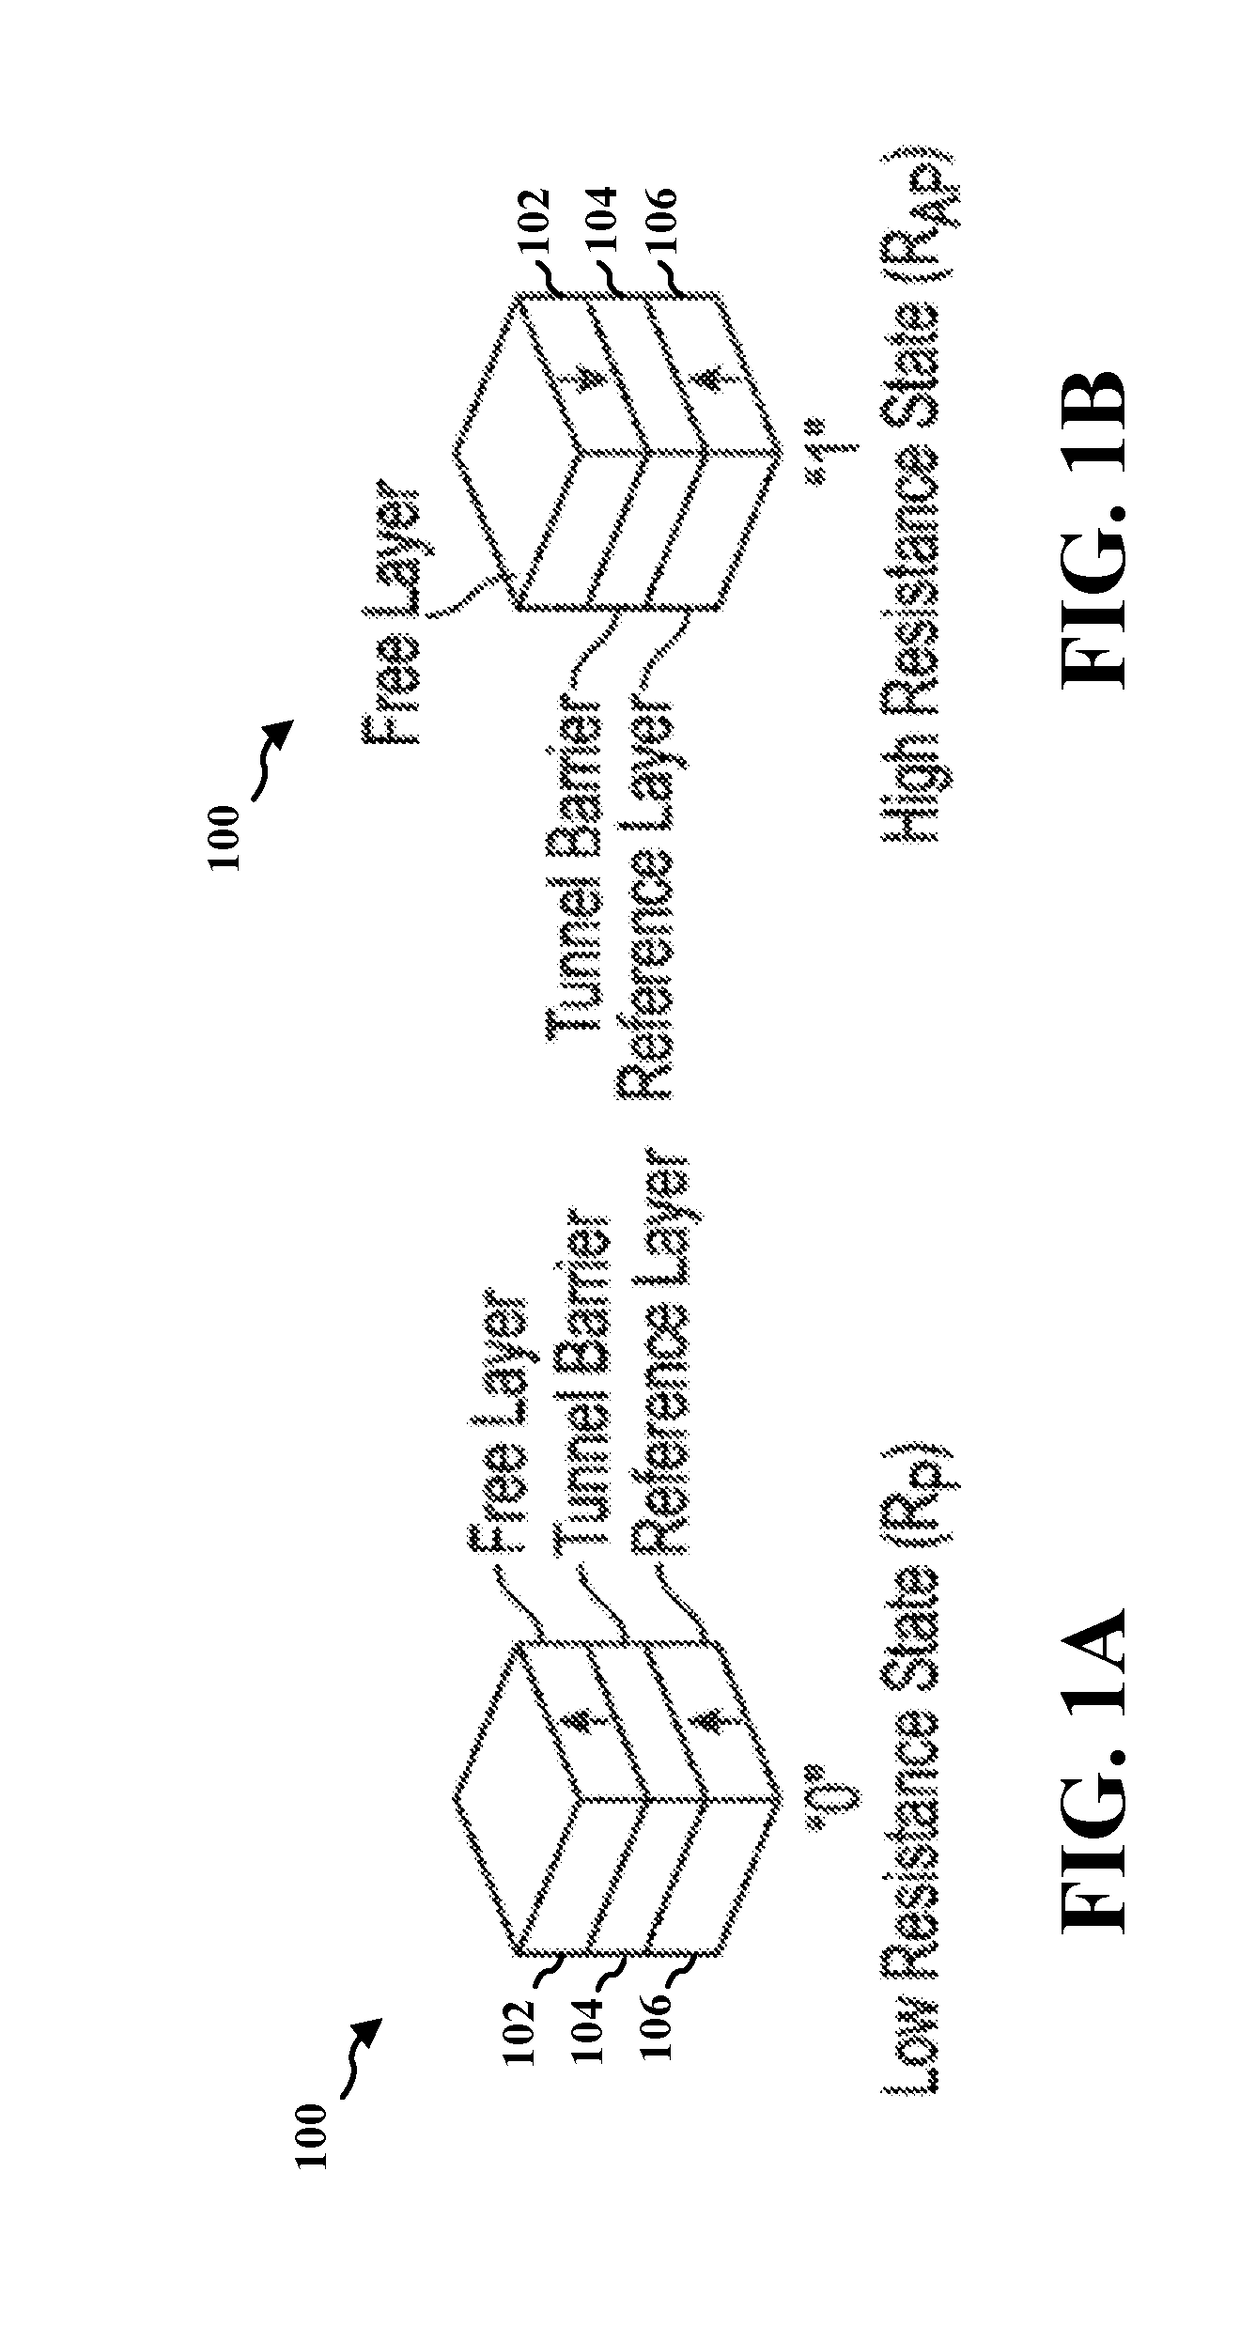 Magnetoresistive random access memory (MRAM) with an interconnect that generates a spin current and a magnetic field effect